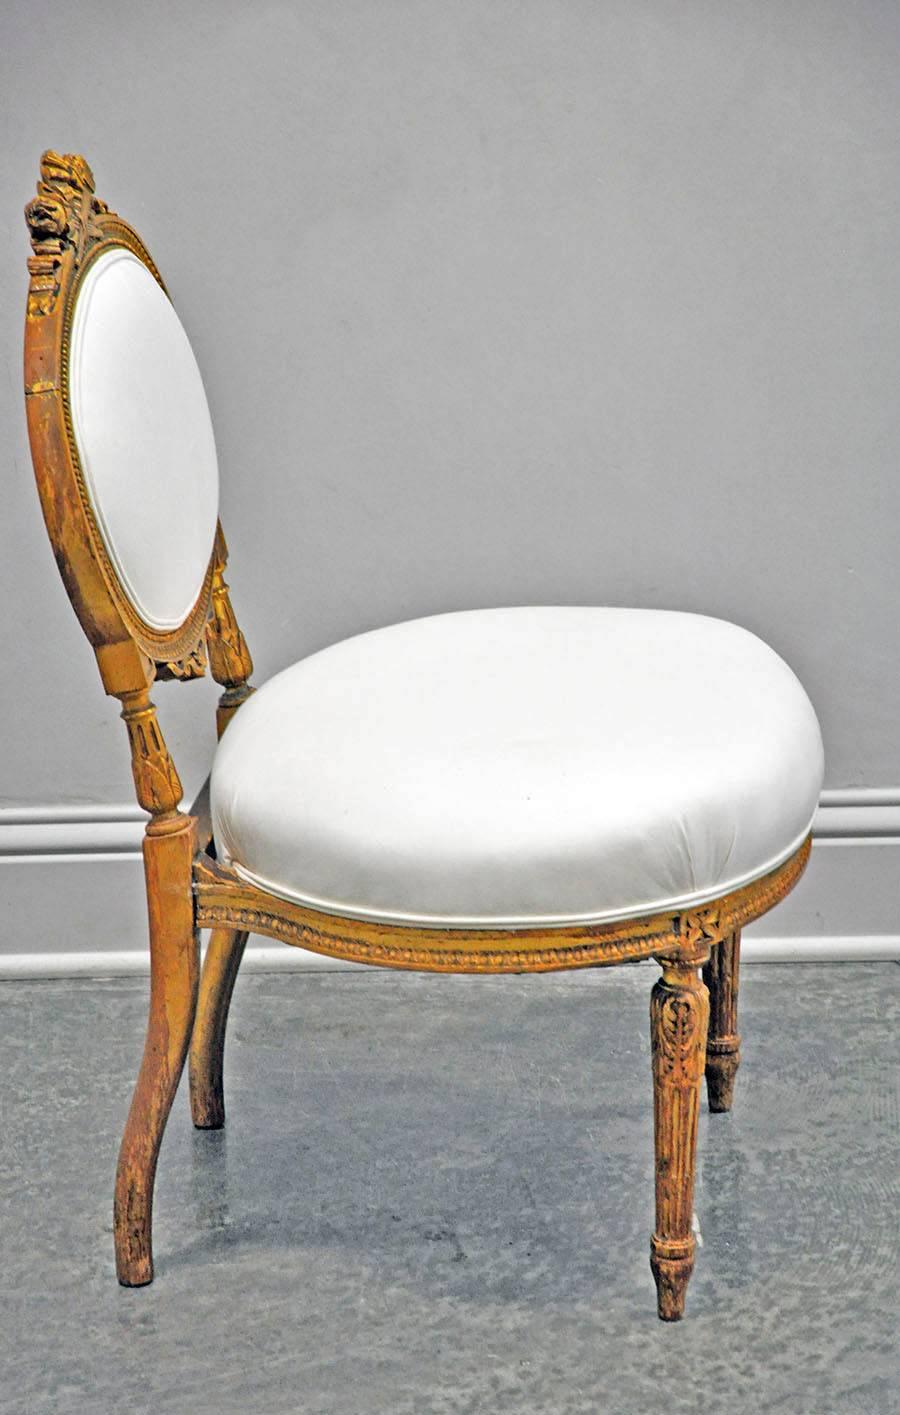 Petite and charming Louis XVI style chauffeuse or fireside chair with gold gilt and upholstered in muslin. Carved bow and fluting details make this a beautiful addition to any space.

Established in 1979, Joyce Horn Antiques, ltd. continues its 38